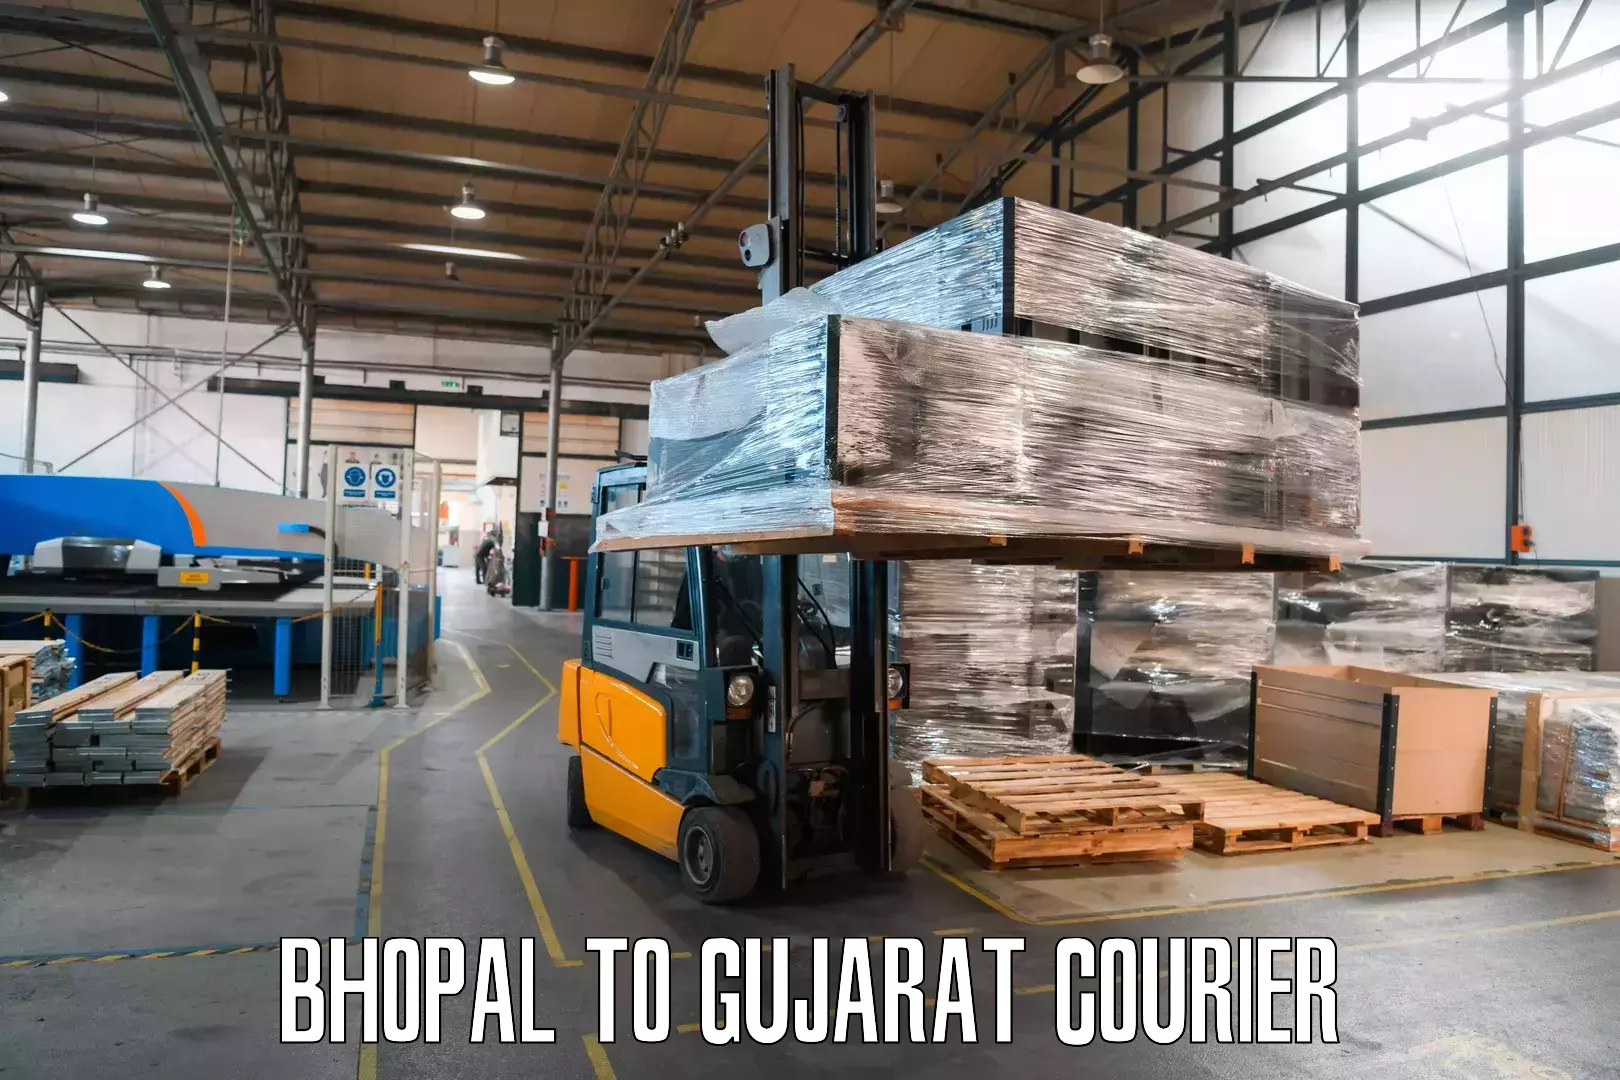 Global delivery options Bhopal to Vadodara